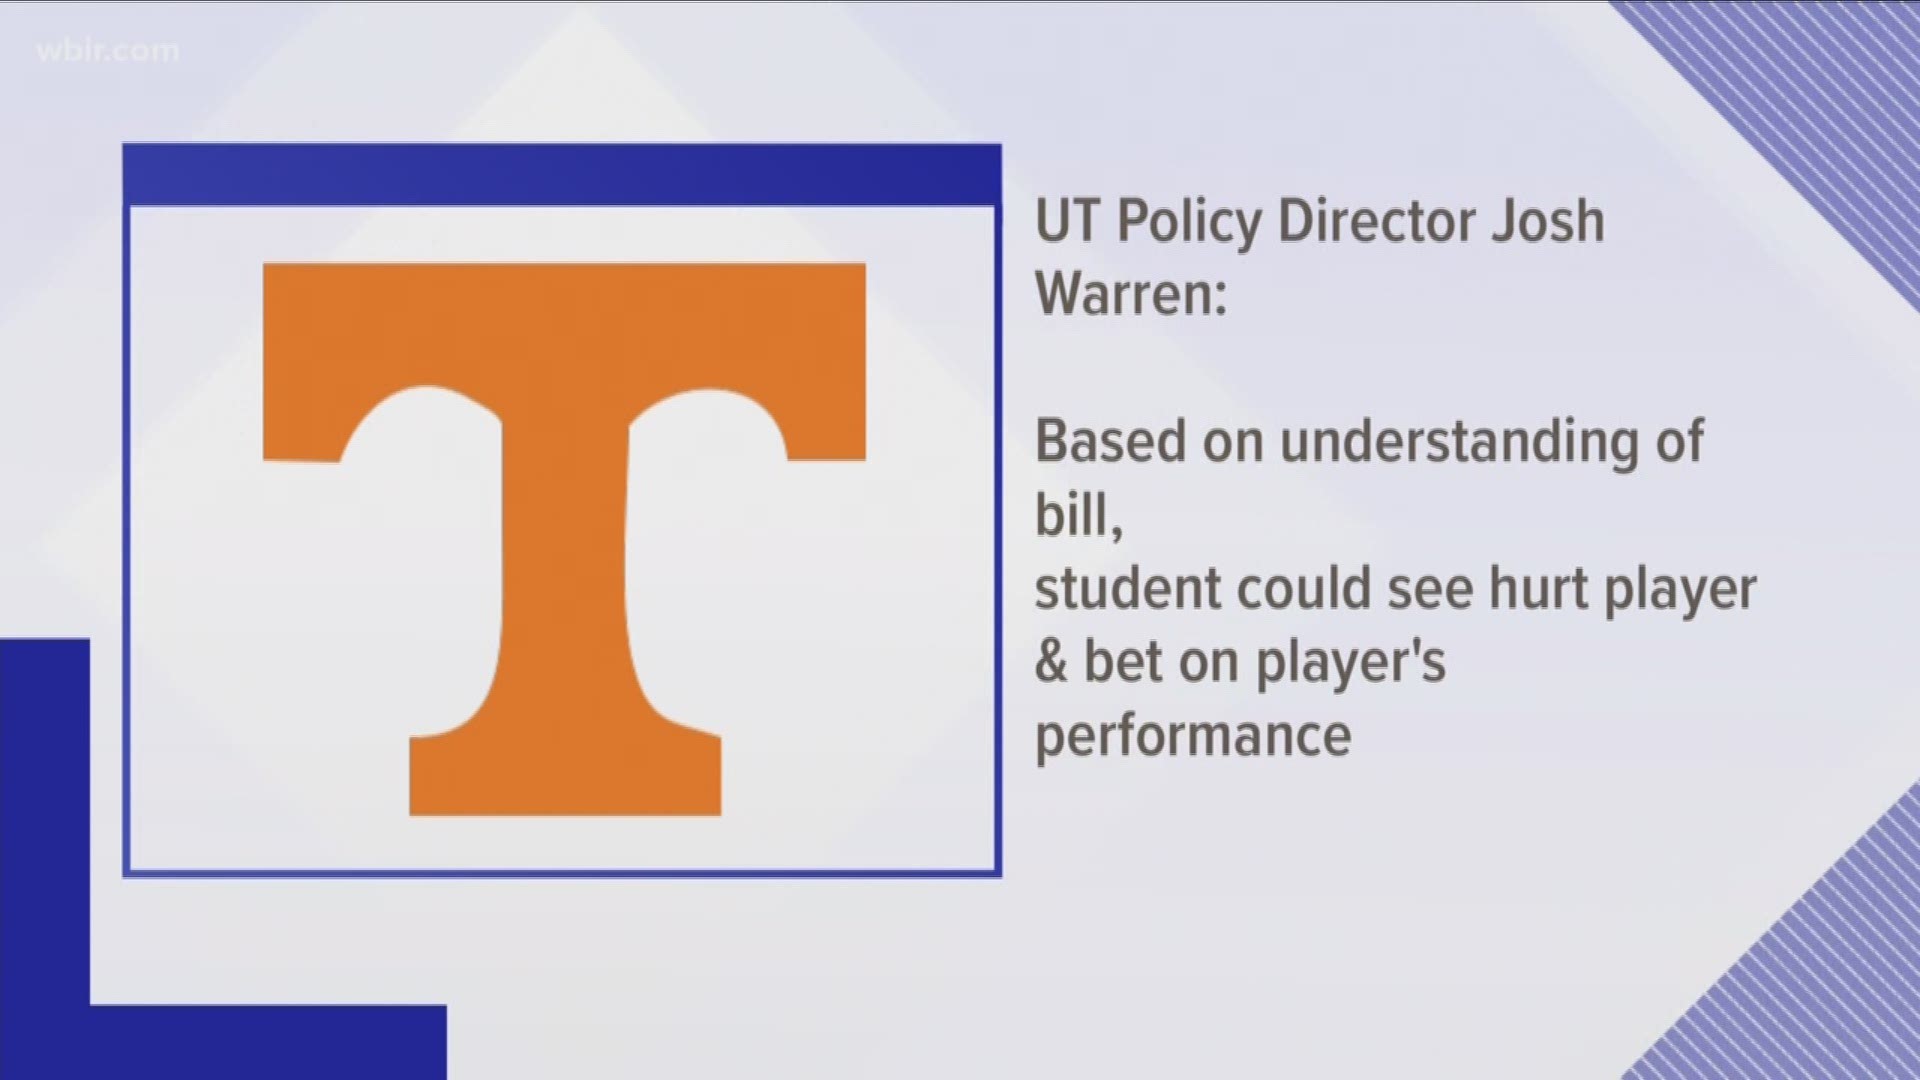 University of Tennessee leaders are expressing concerns about a measure that would legalize certain sports gambling.